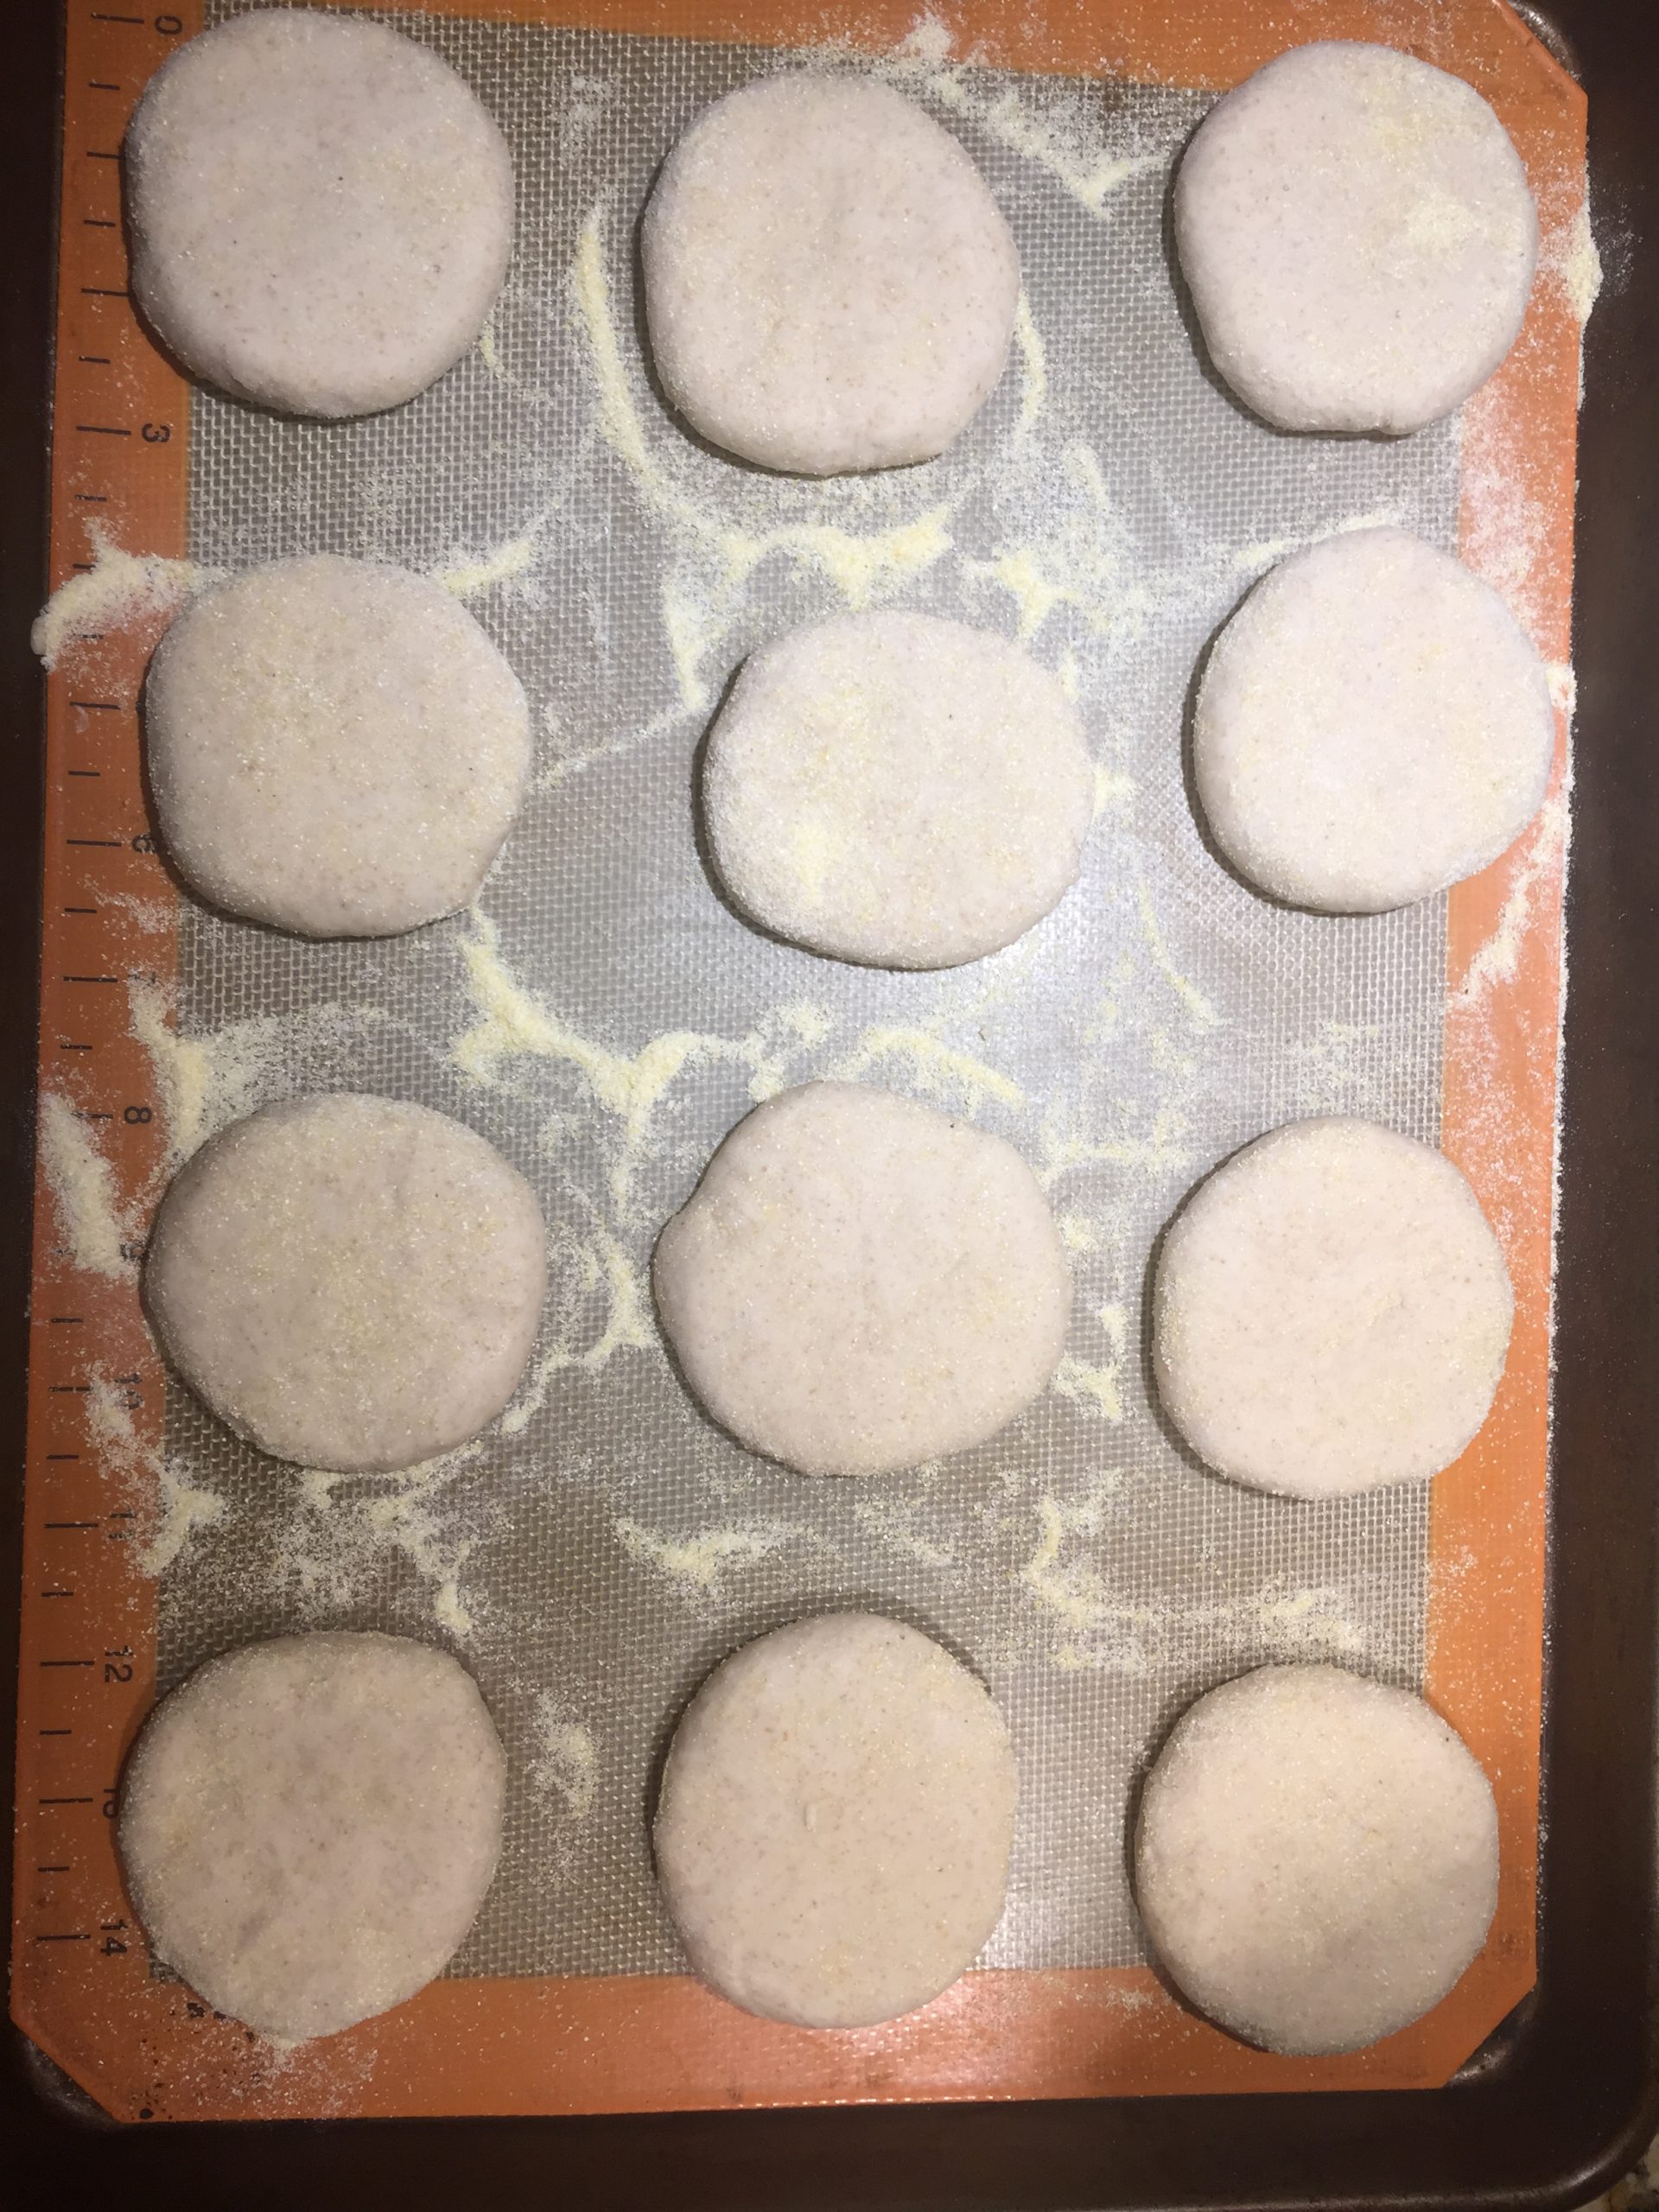 English muffins before proofing